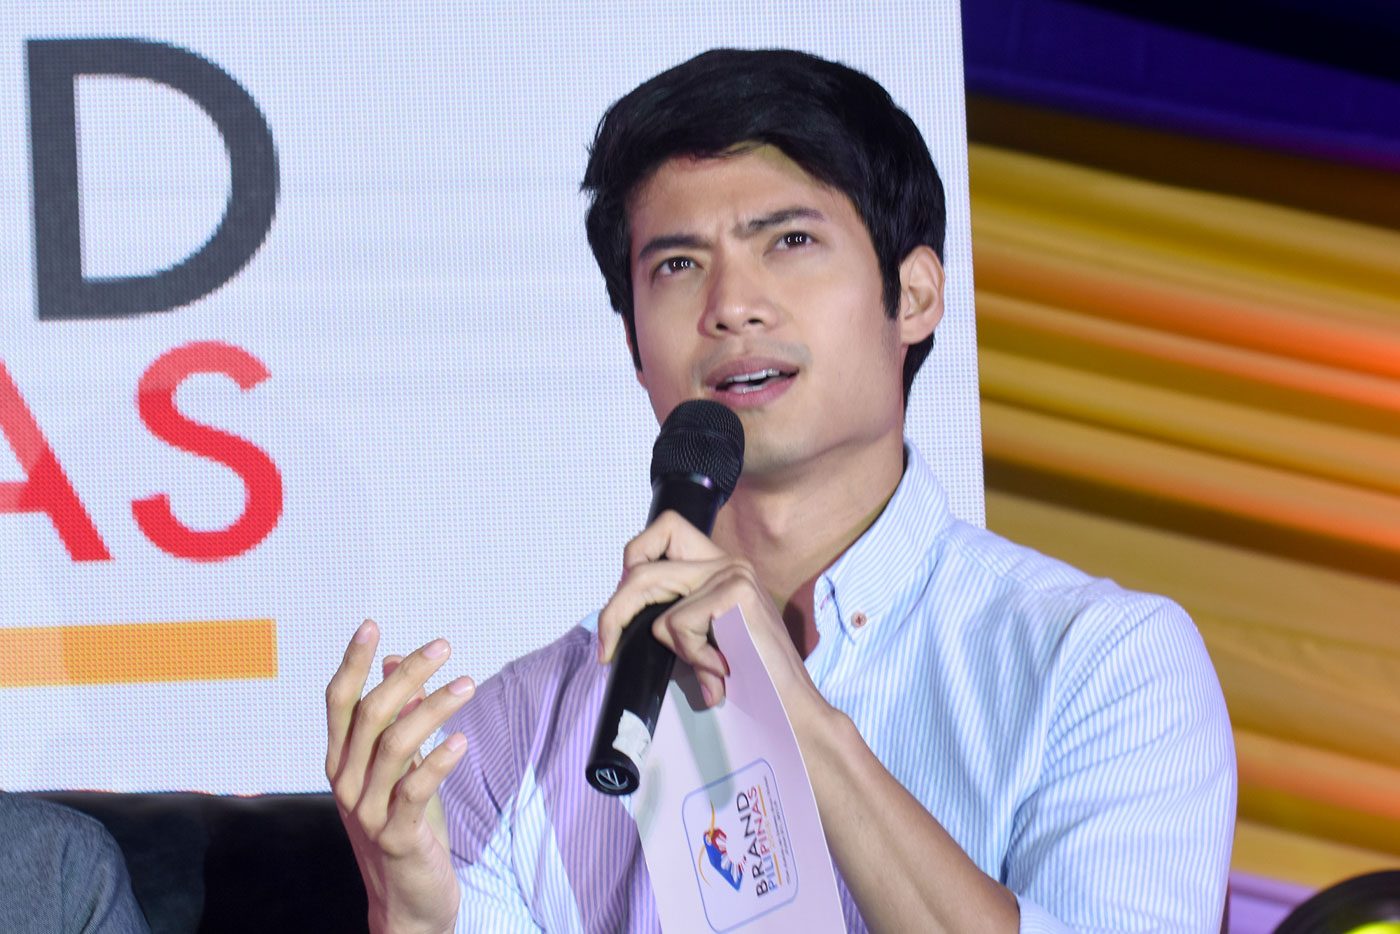 CELEBRITY GUESTS. Jasmine Curtis-Smith and Mikael Daez joined in as co-moderators for the event's last panels. Photo by Angie de Silva/Rappler 